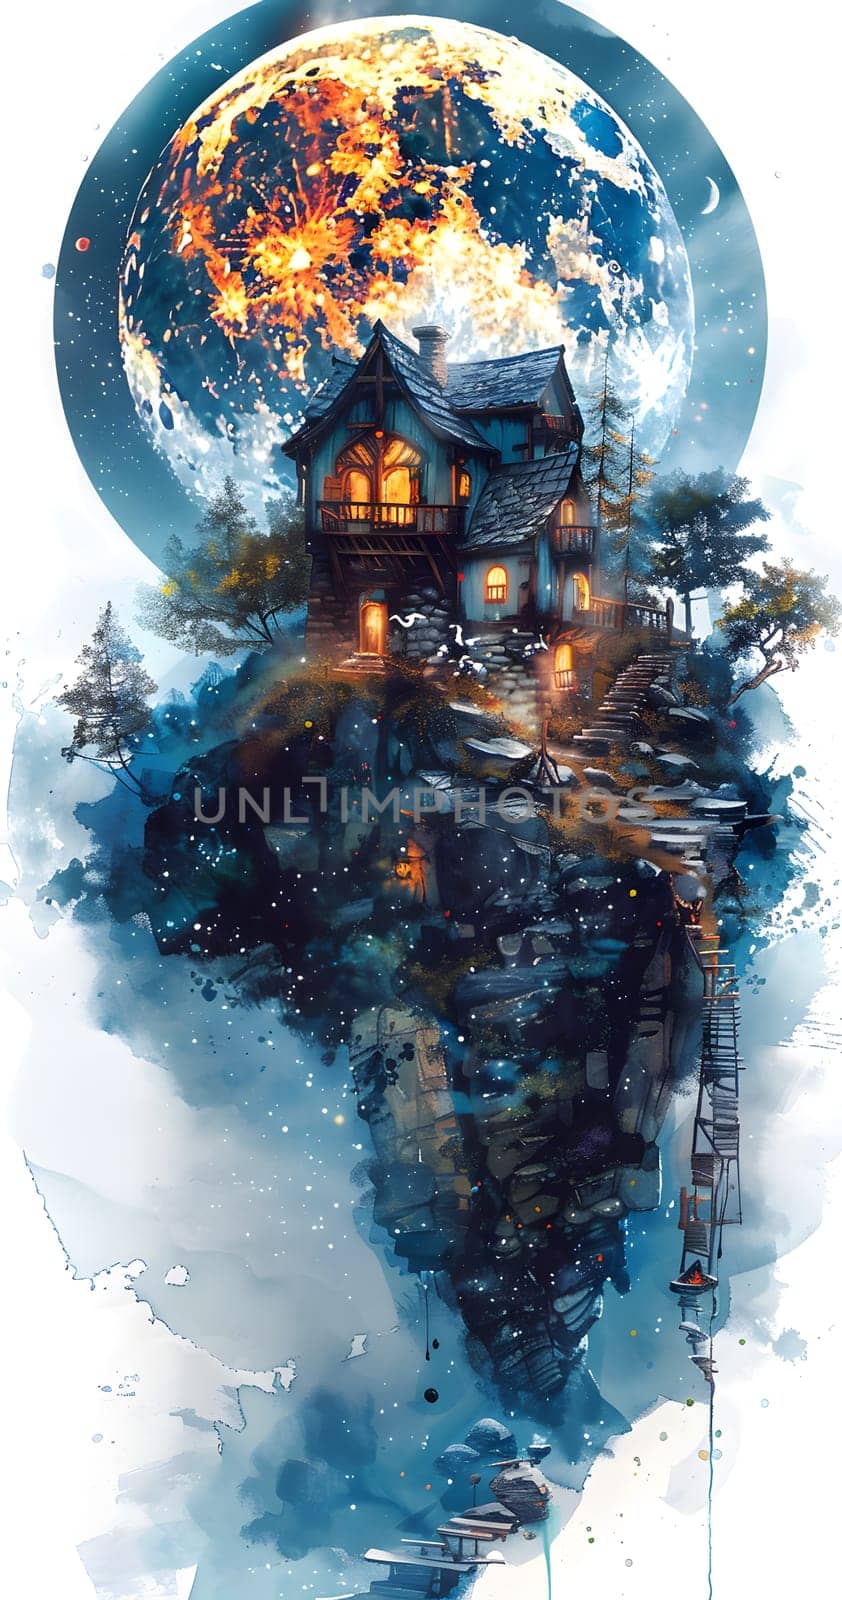 A painting of a house on a small island with a full moon in the background, featuring electric blue hues and intricate patterns. A beautiful blend of world art and fiction